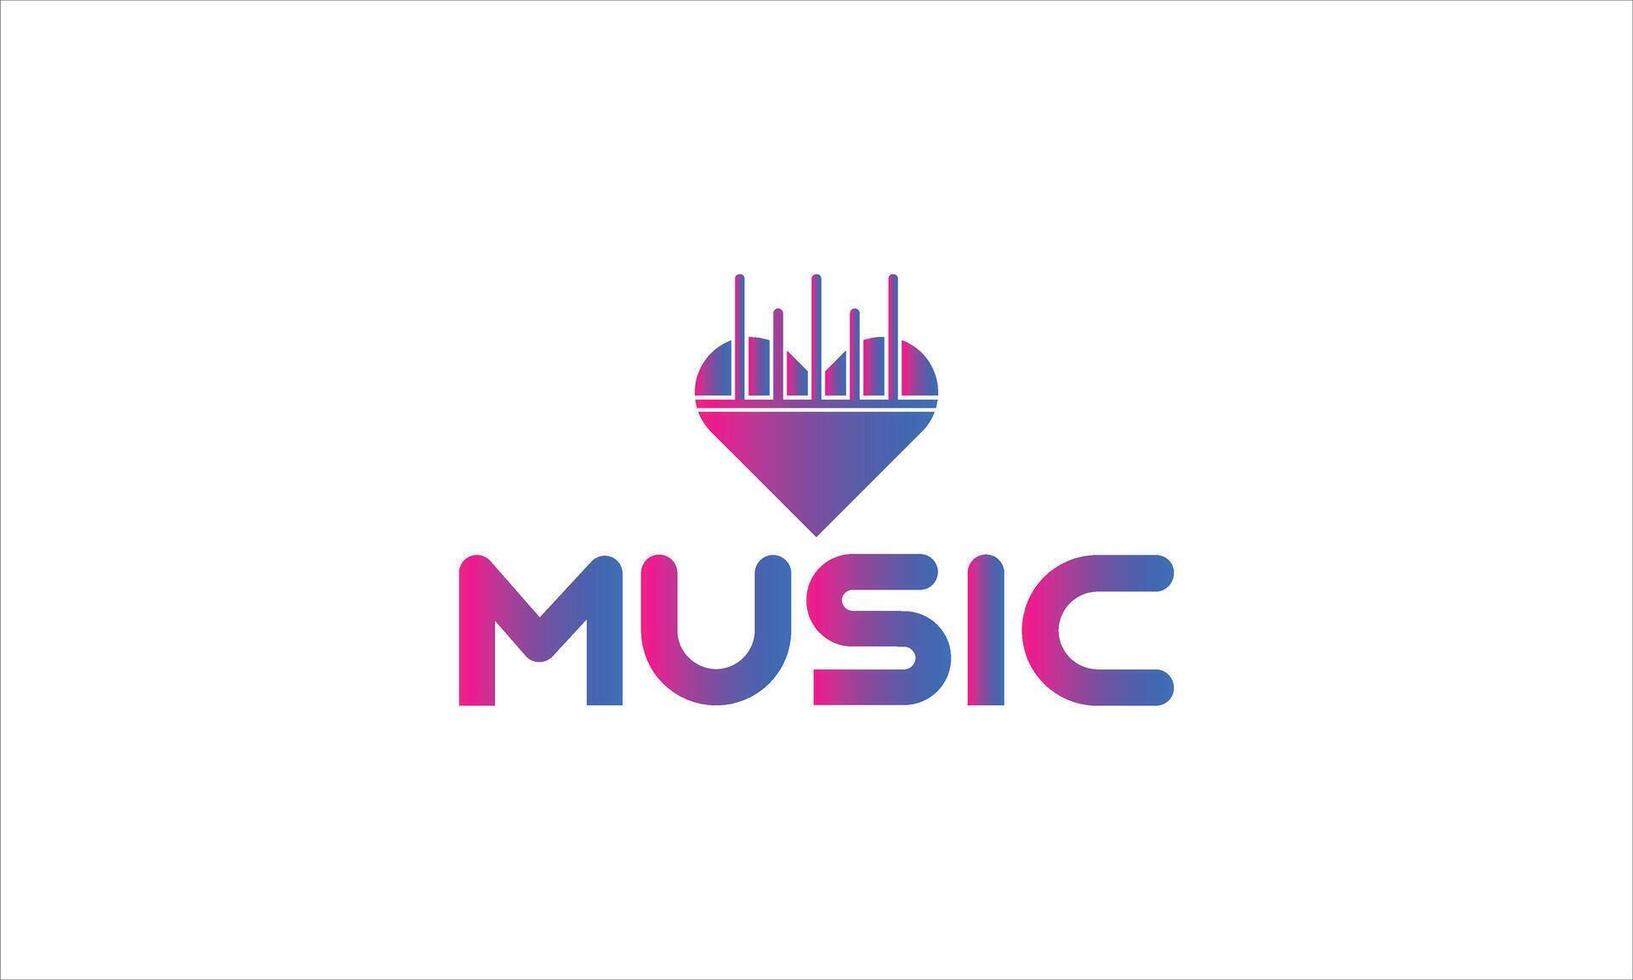 A visual ode to the beauty of words and music, our logo is a harmonious blend of creativity vector